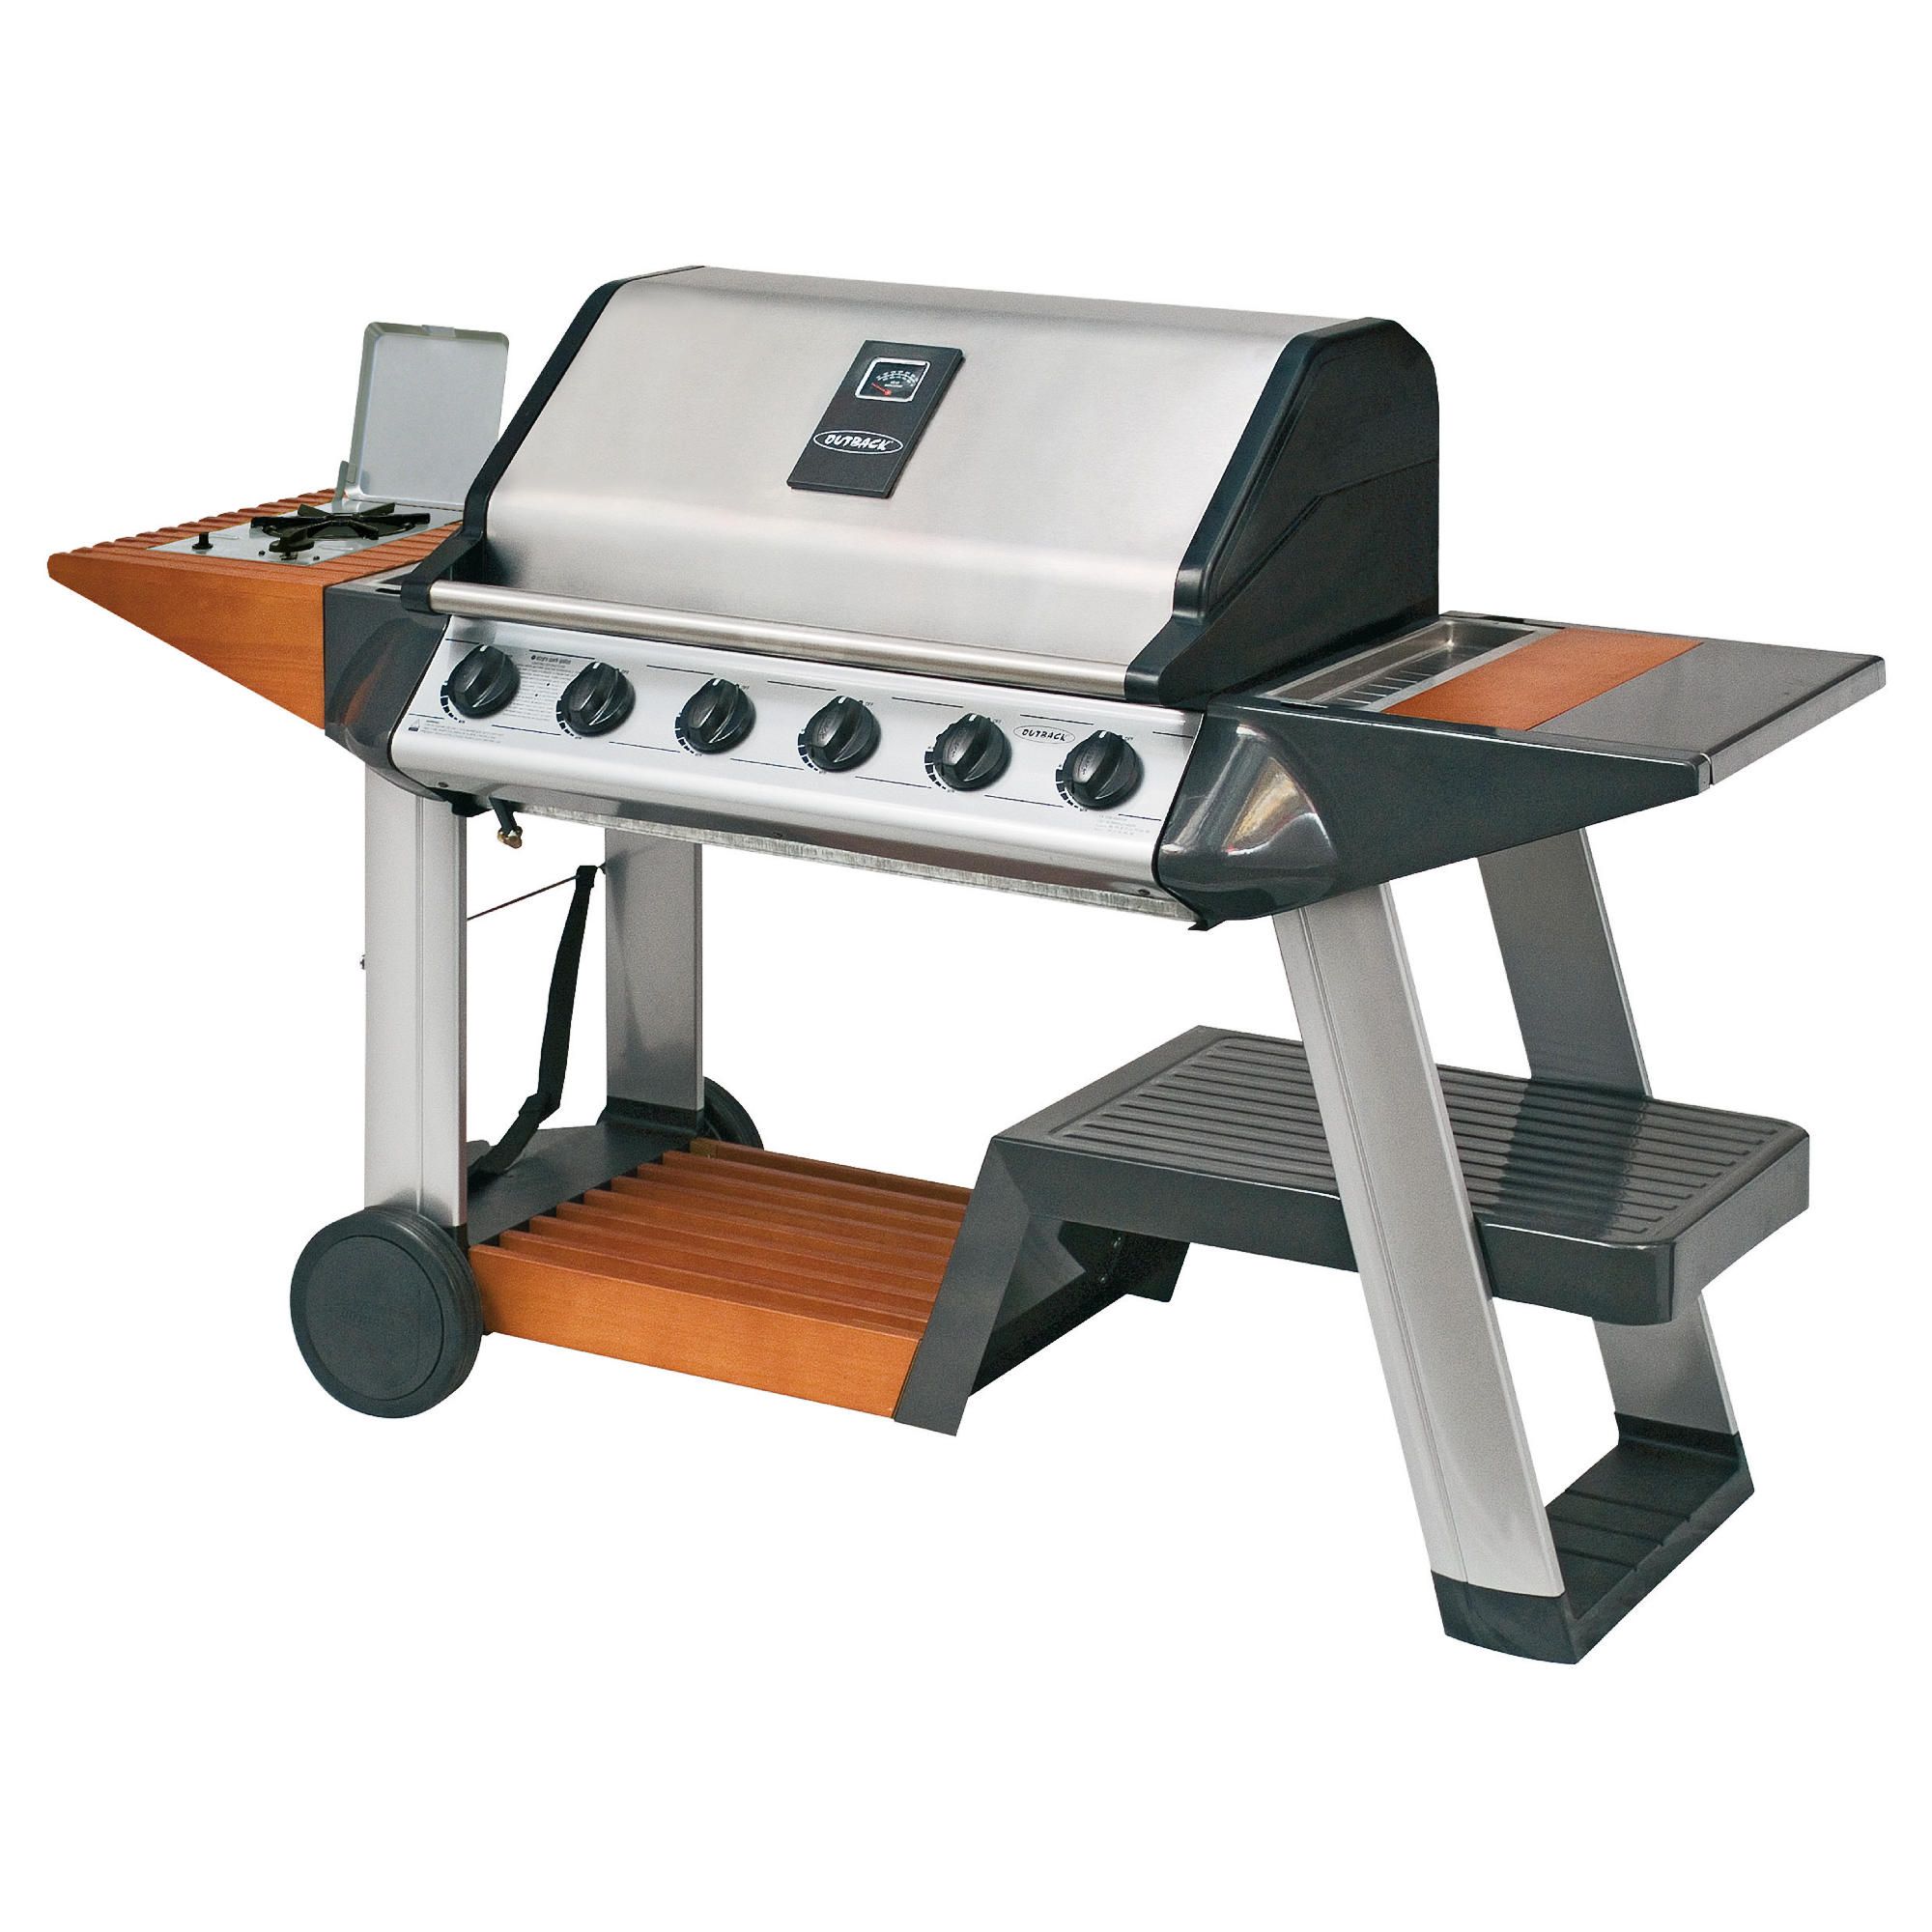 Outback Excelsior 6 Burner Gas BBQ with Cover at Tesco Direct